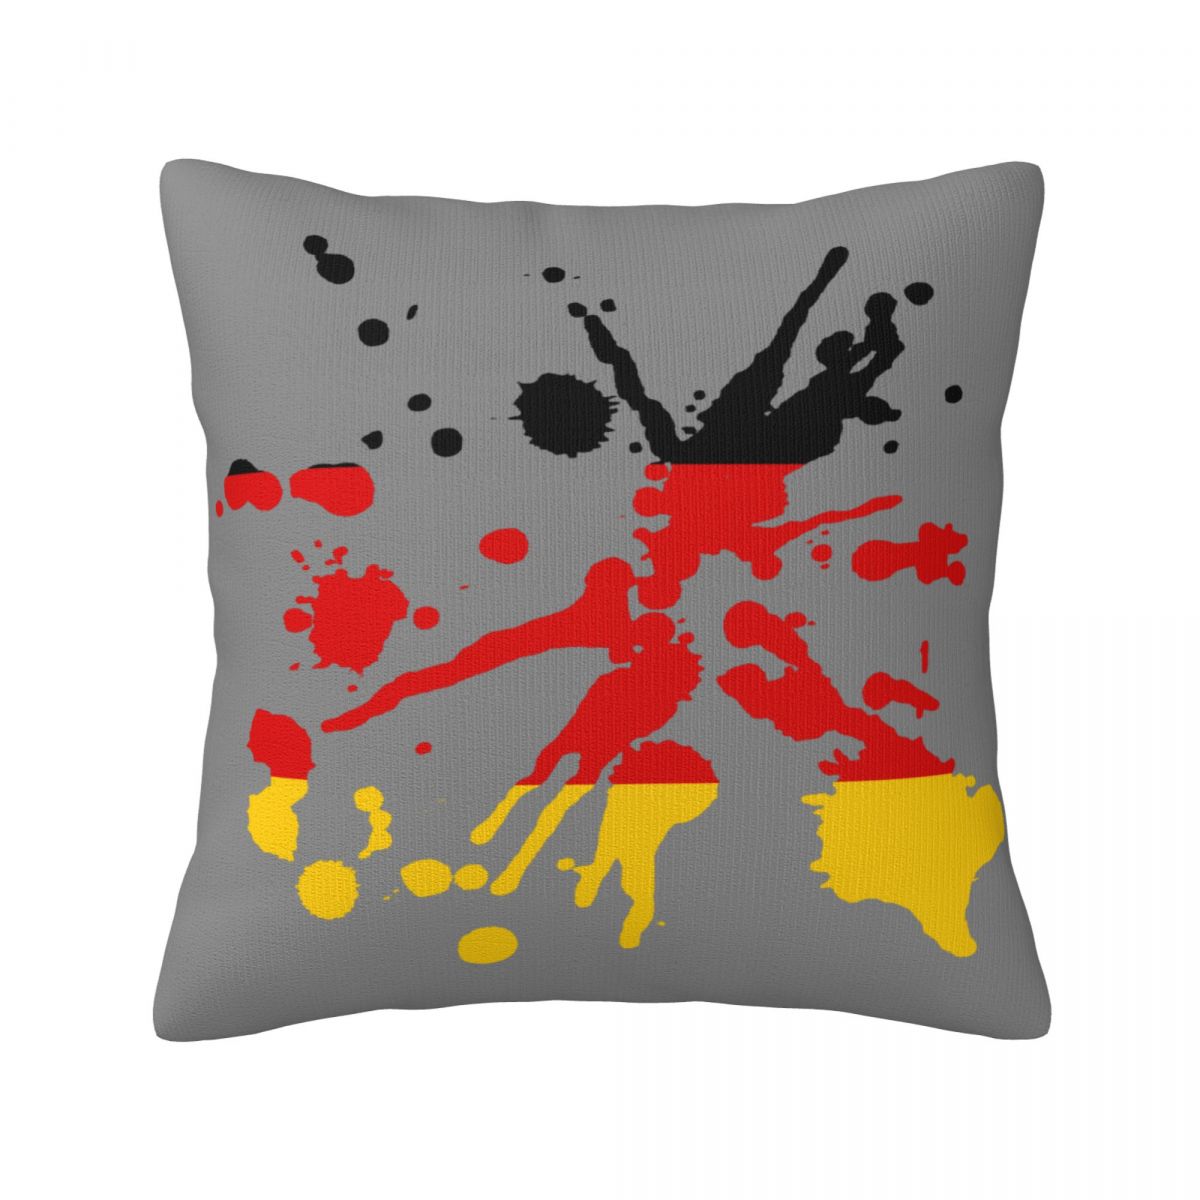 Germany Ink Spatter Pillow Covers 18x18 Inch